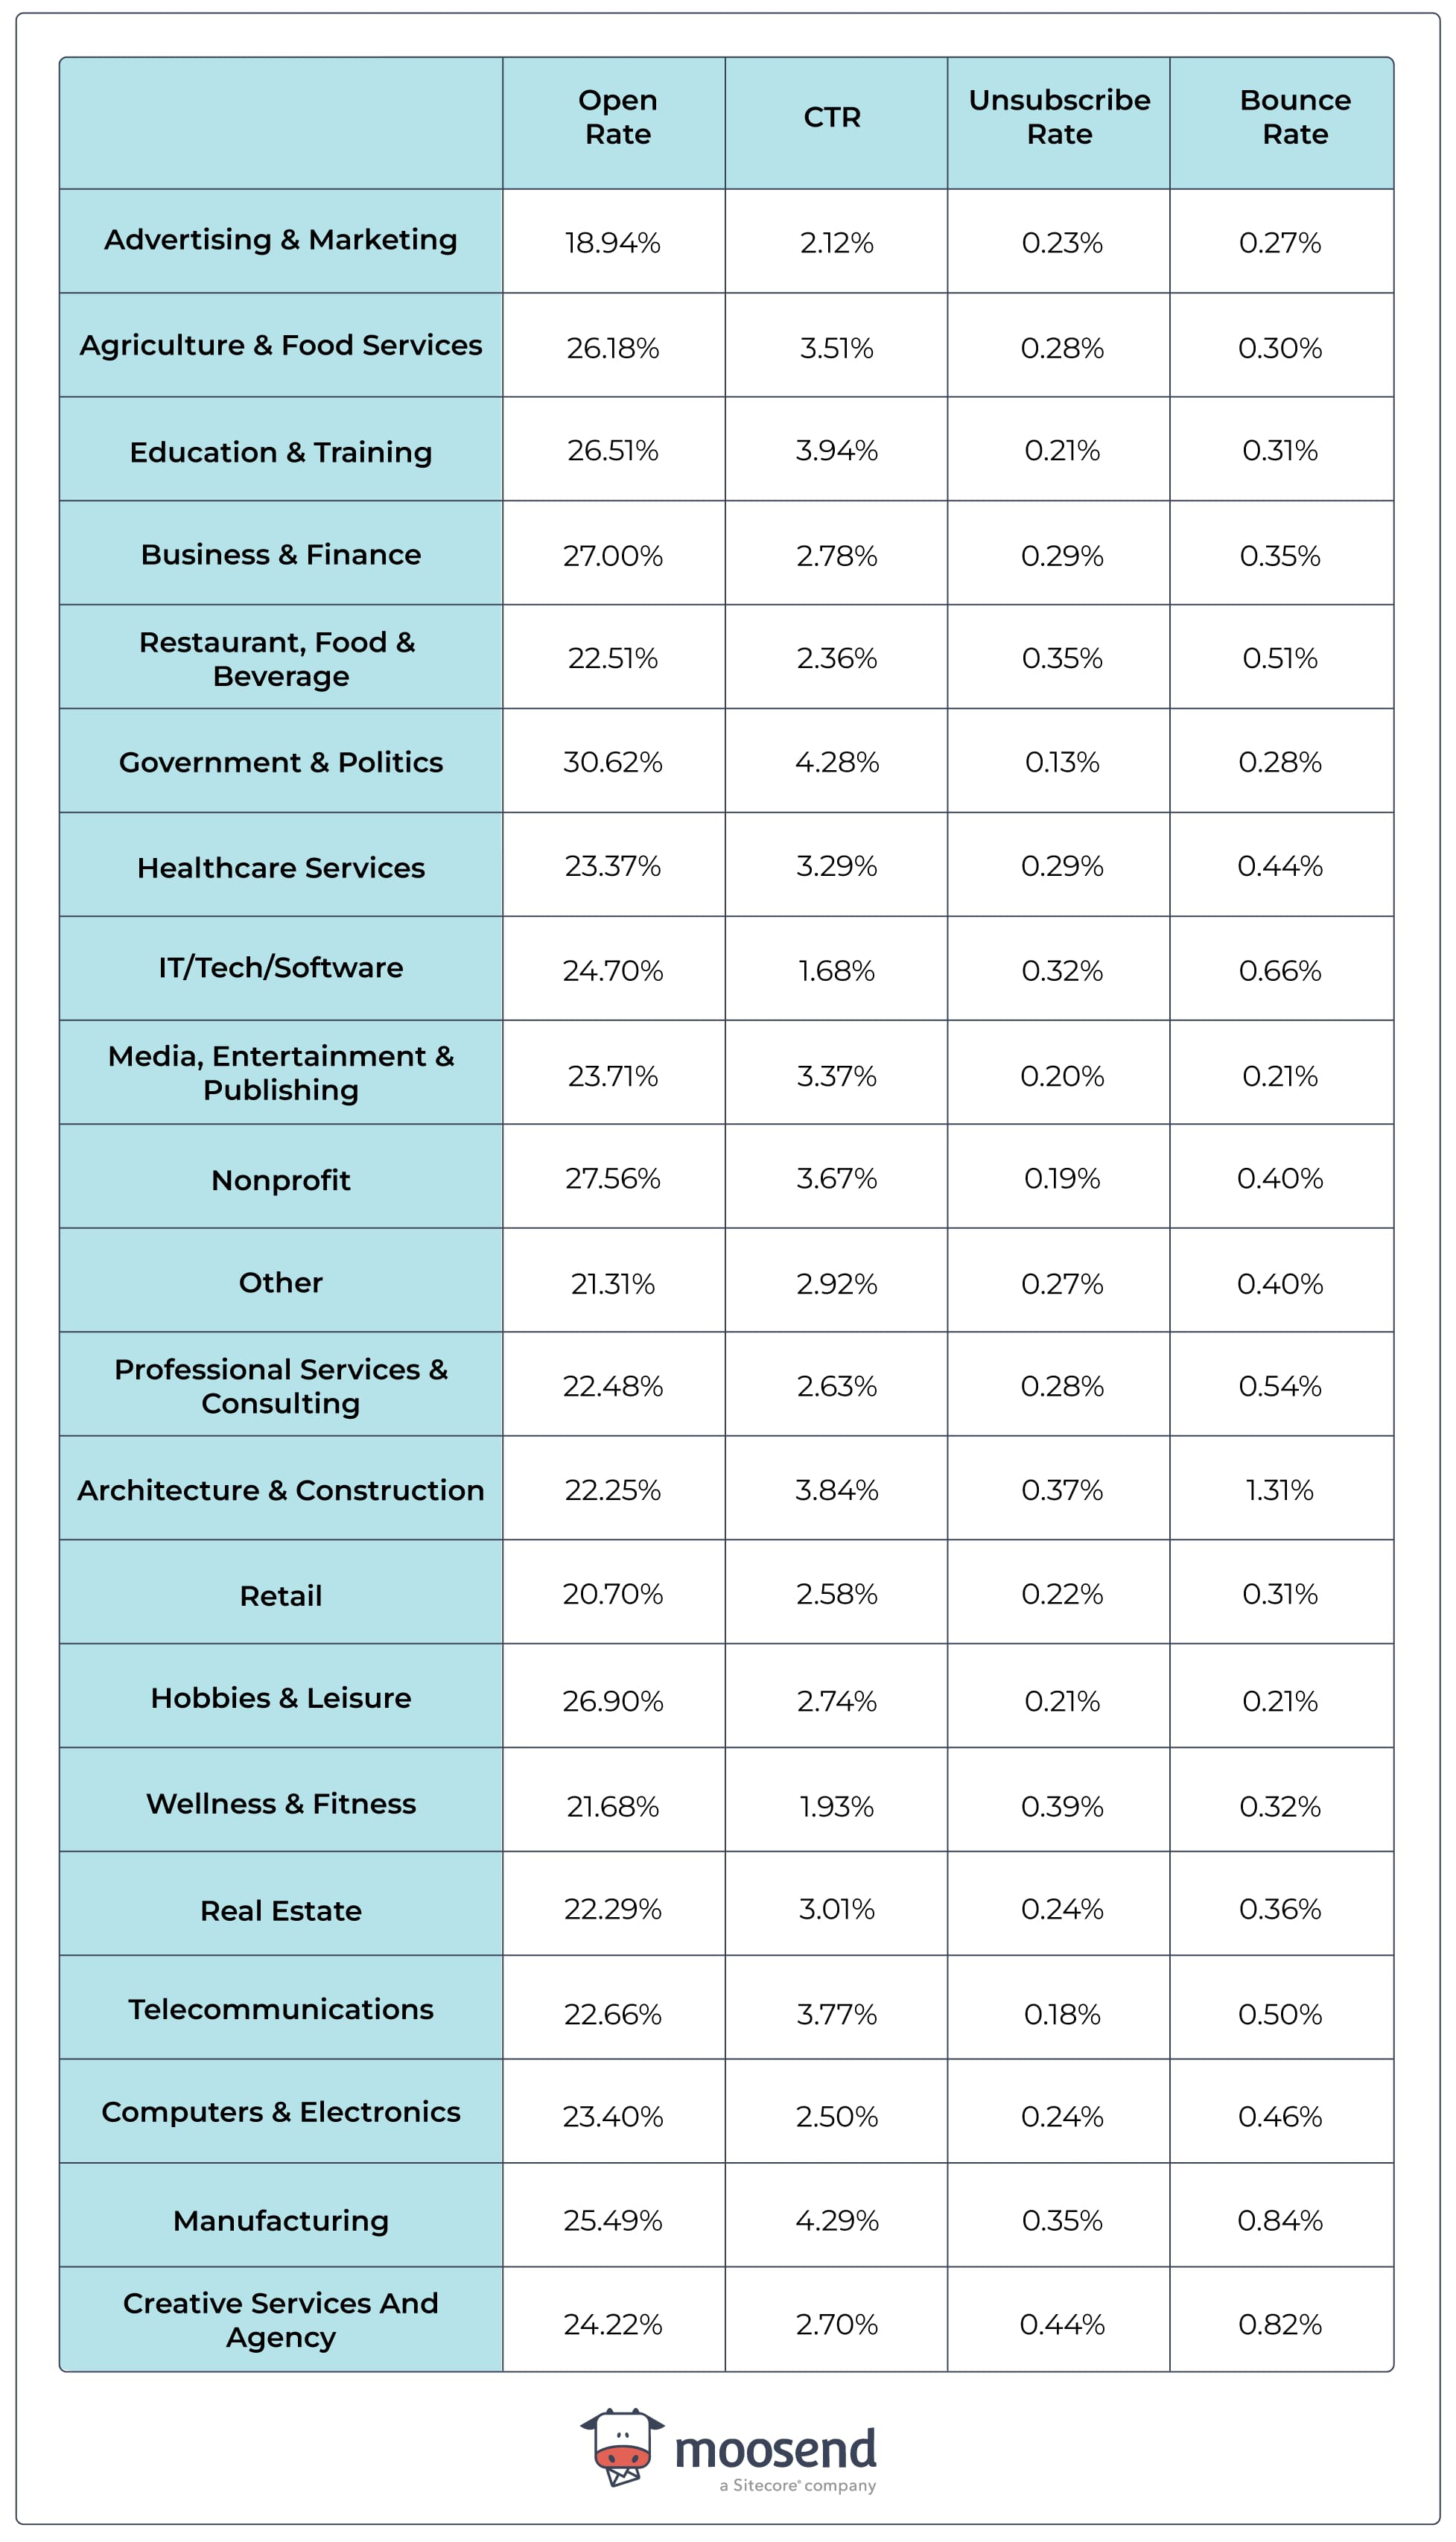 A table showing average email marketing metrics, including email open rates, CTR, unsubscribes, and bounce rate